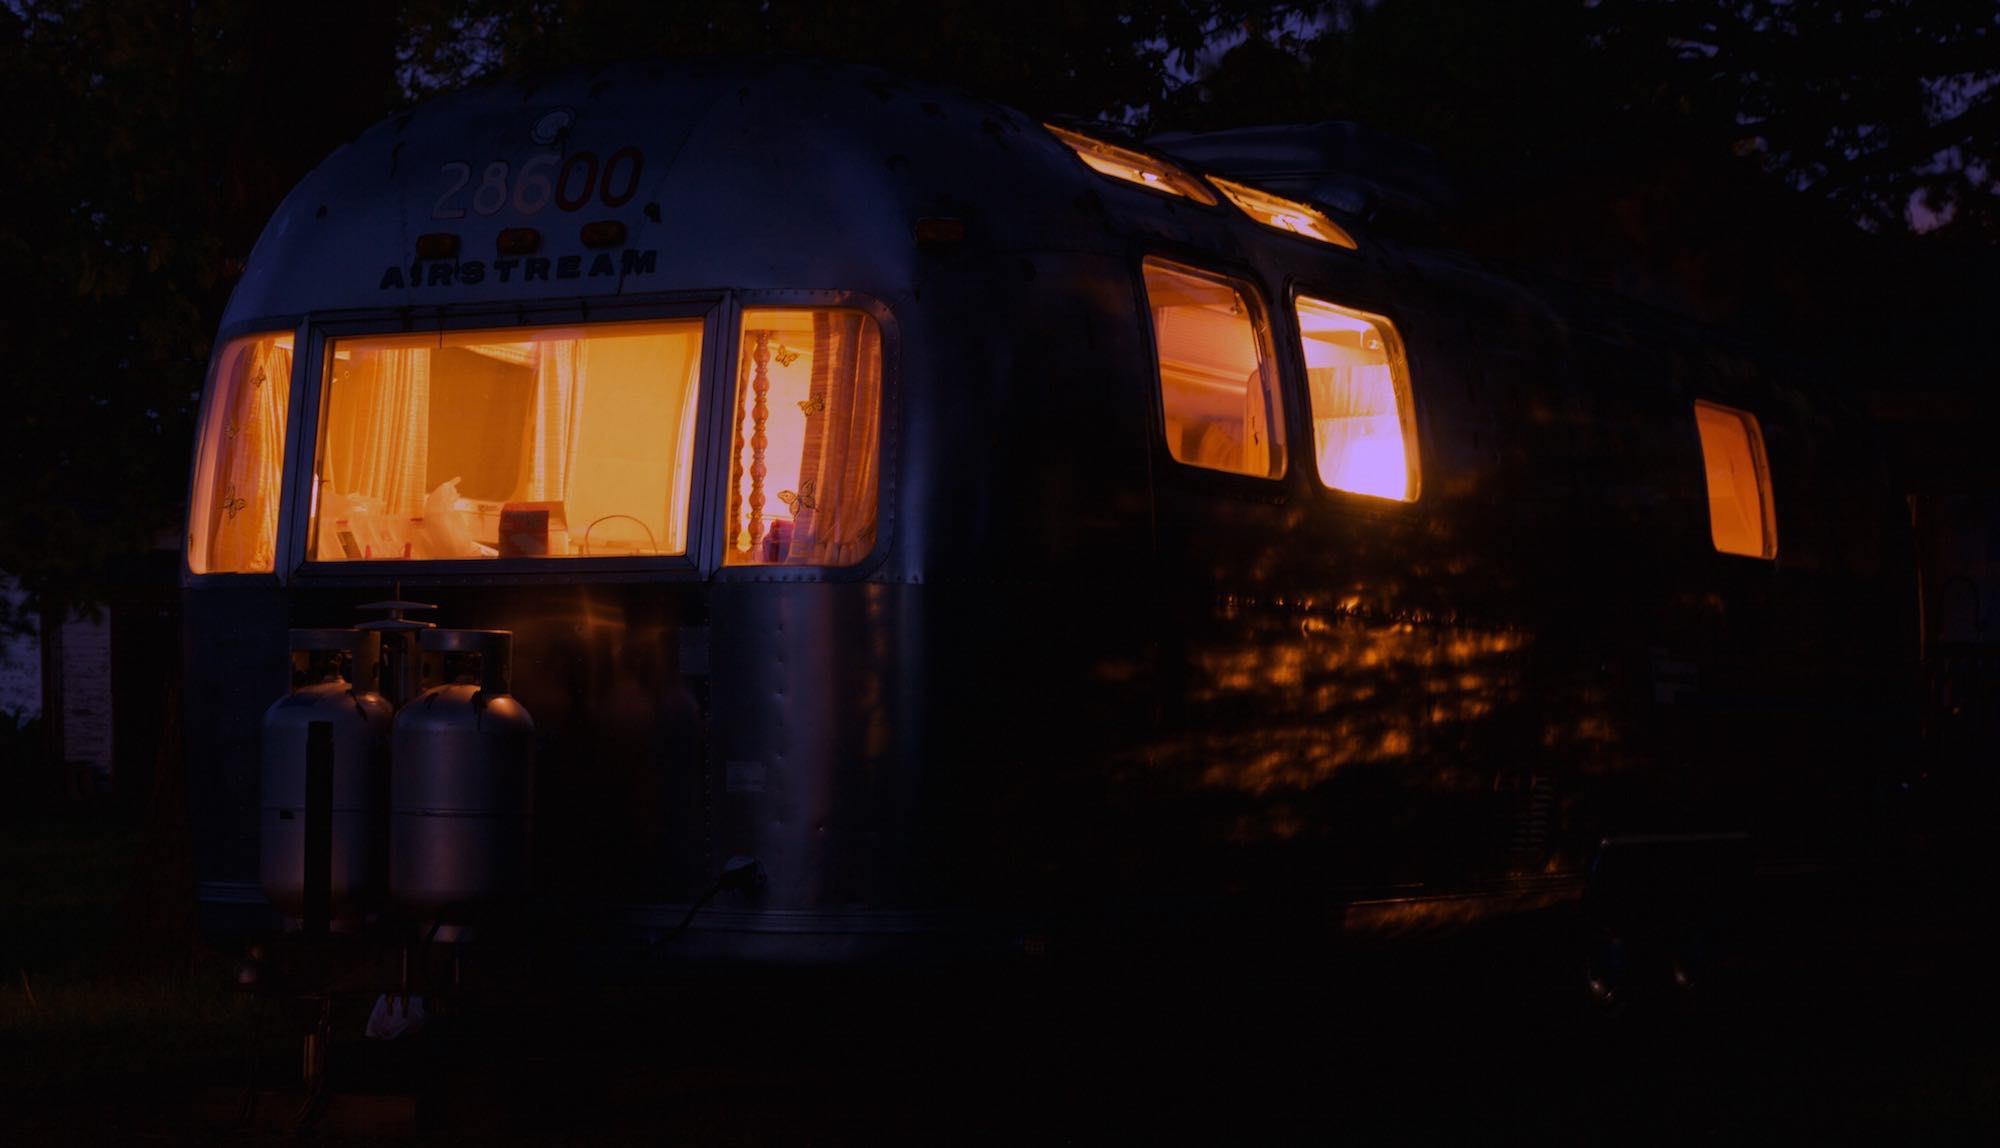 A night view of our Airstream camper.